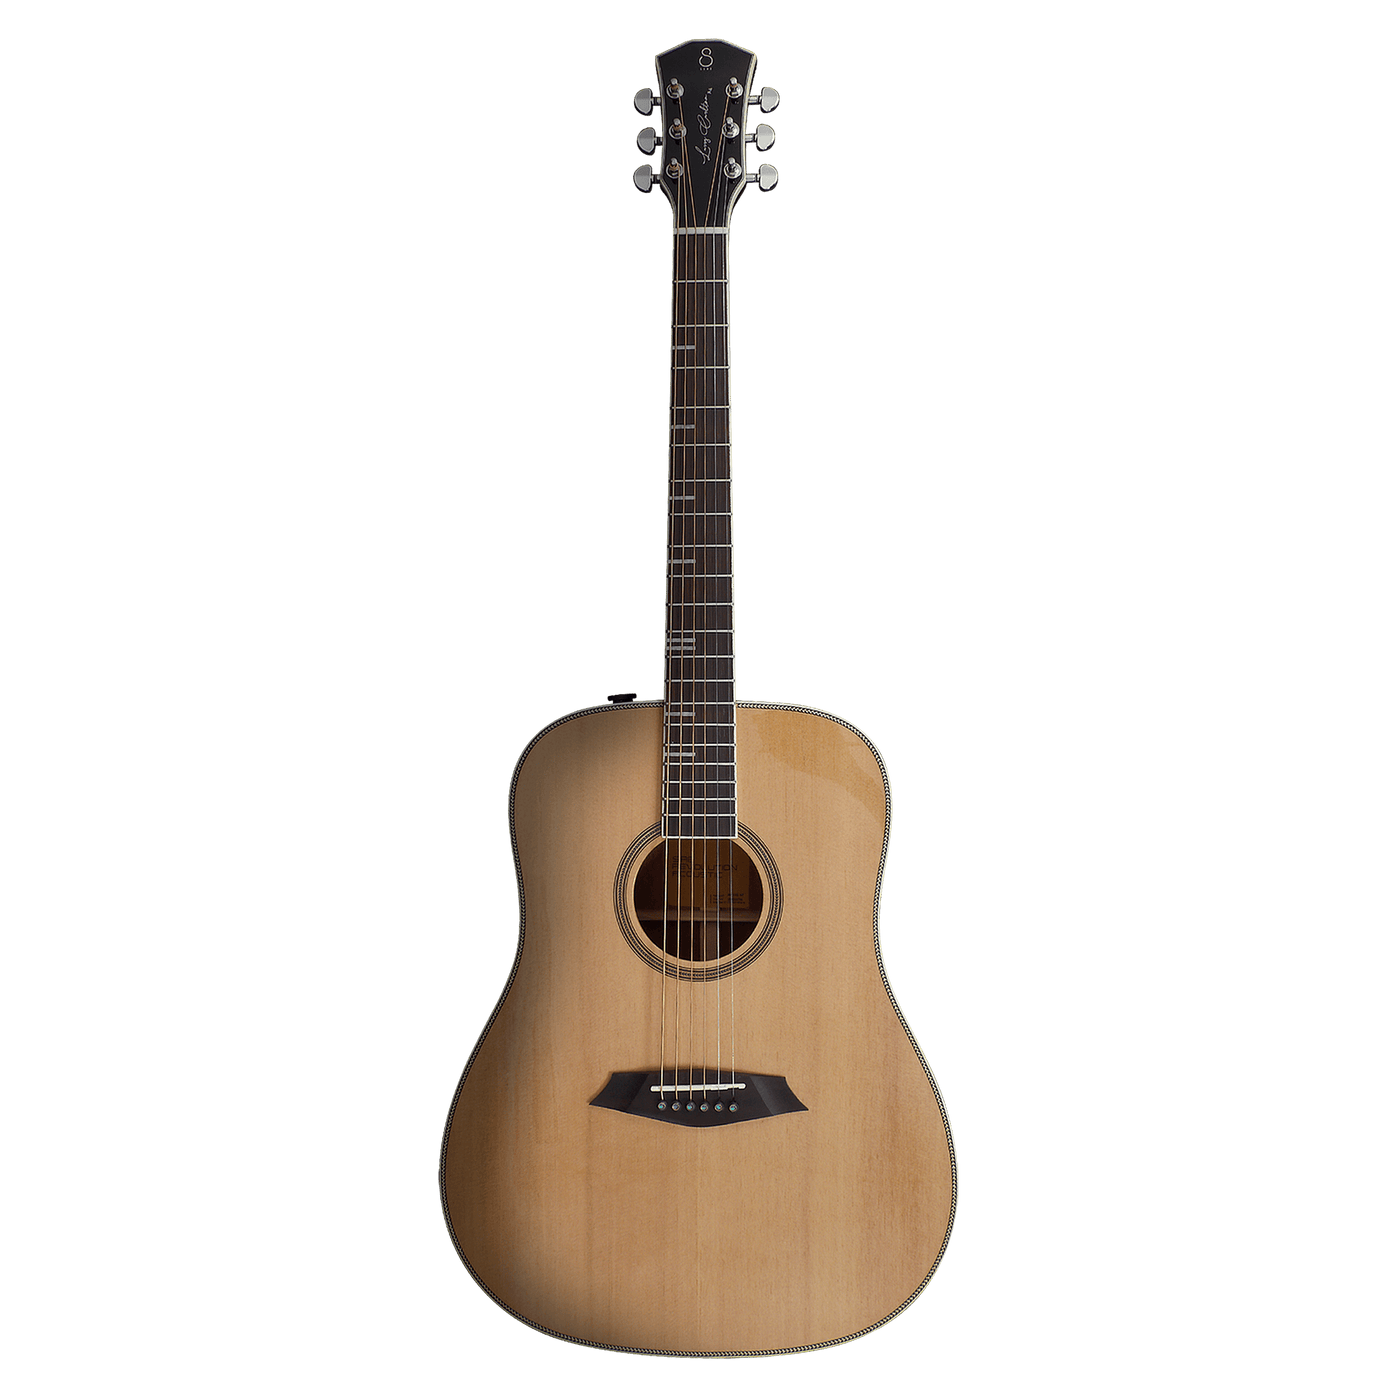 Sire A4-D Natural - $799990 - Gearhub - The upgraded Sire acoustic guitar is brimming with design and features meeting the quality standard of Larry Carlton. The A4 has two body shapes - Dreadnought and Grand Auditorium. More than the comfort from the rolled fretboard edges, the added solid Mahogany back plate makes the acoustic guitar more worth than its value. Cuerpo • Modelo: Larry Carlton A4-D (Dreadnought)• Top: Roasted Solid Spruce• Sides: Mahogany• Top: Solid Mahogany • Terminación: Polyurethane Glos